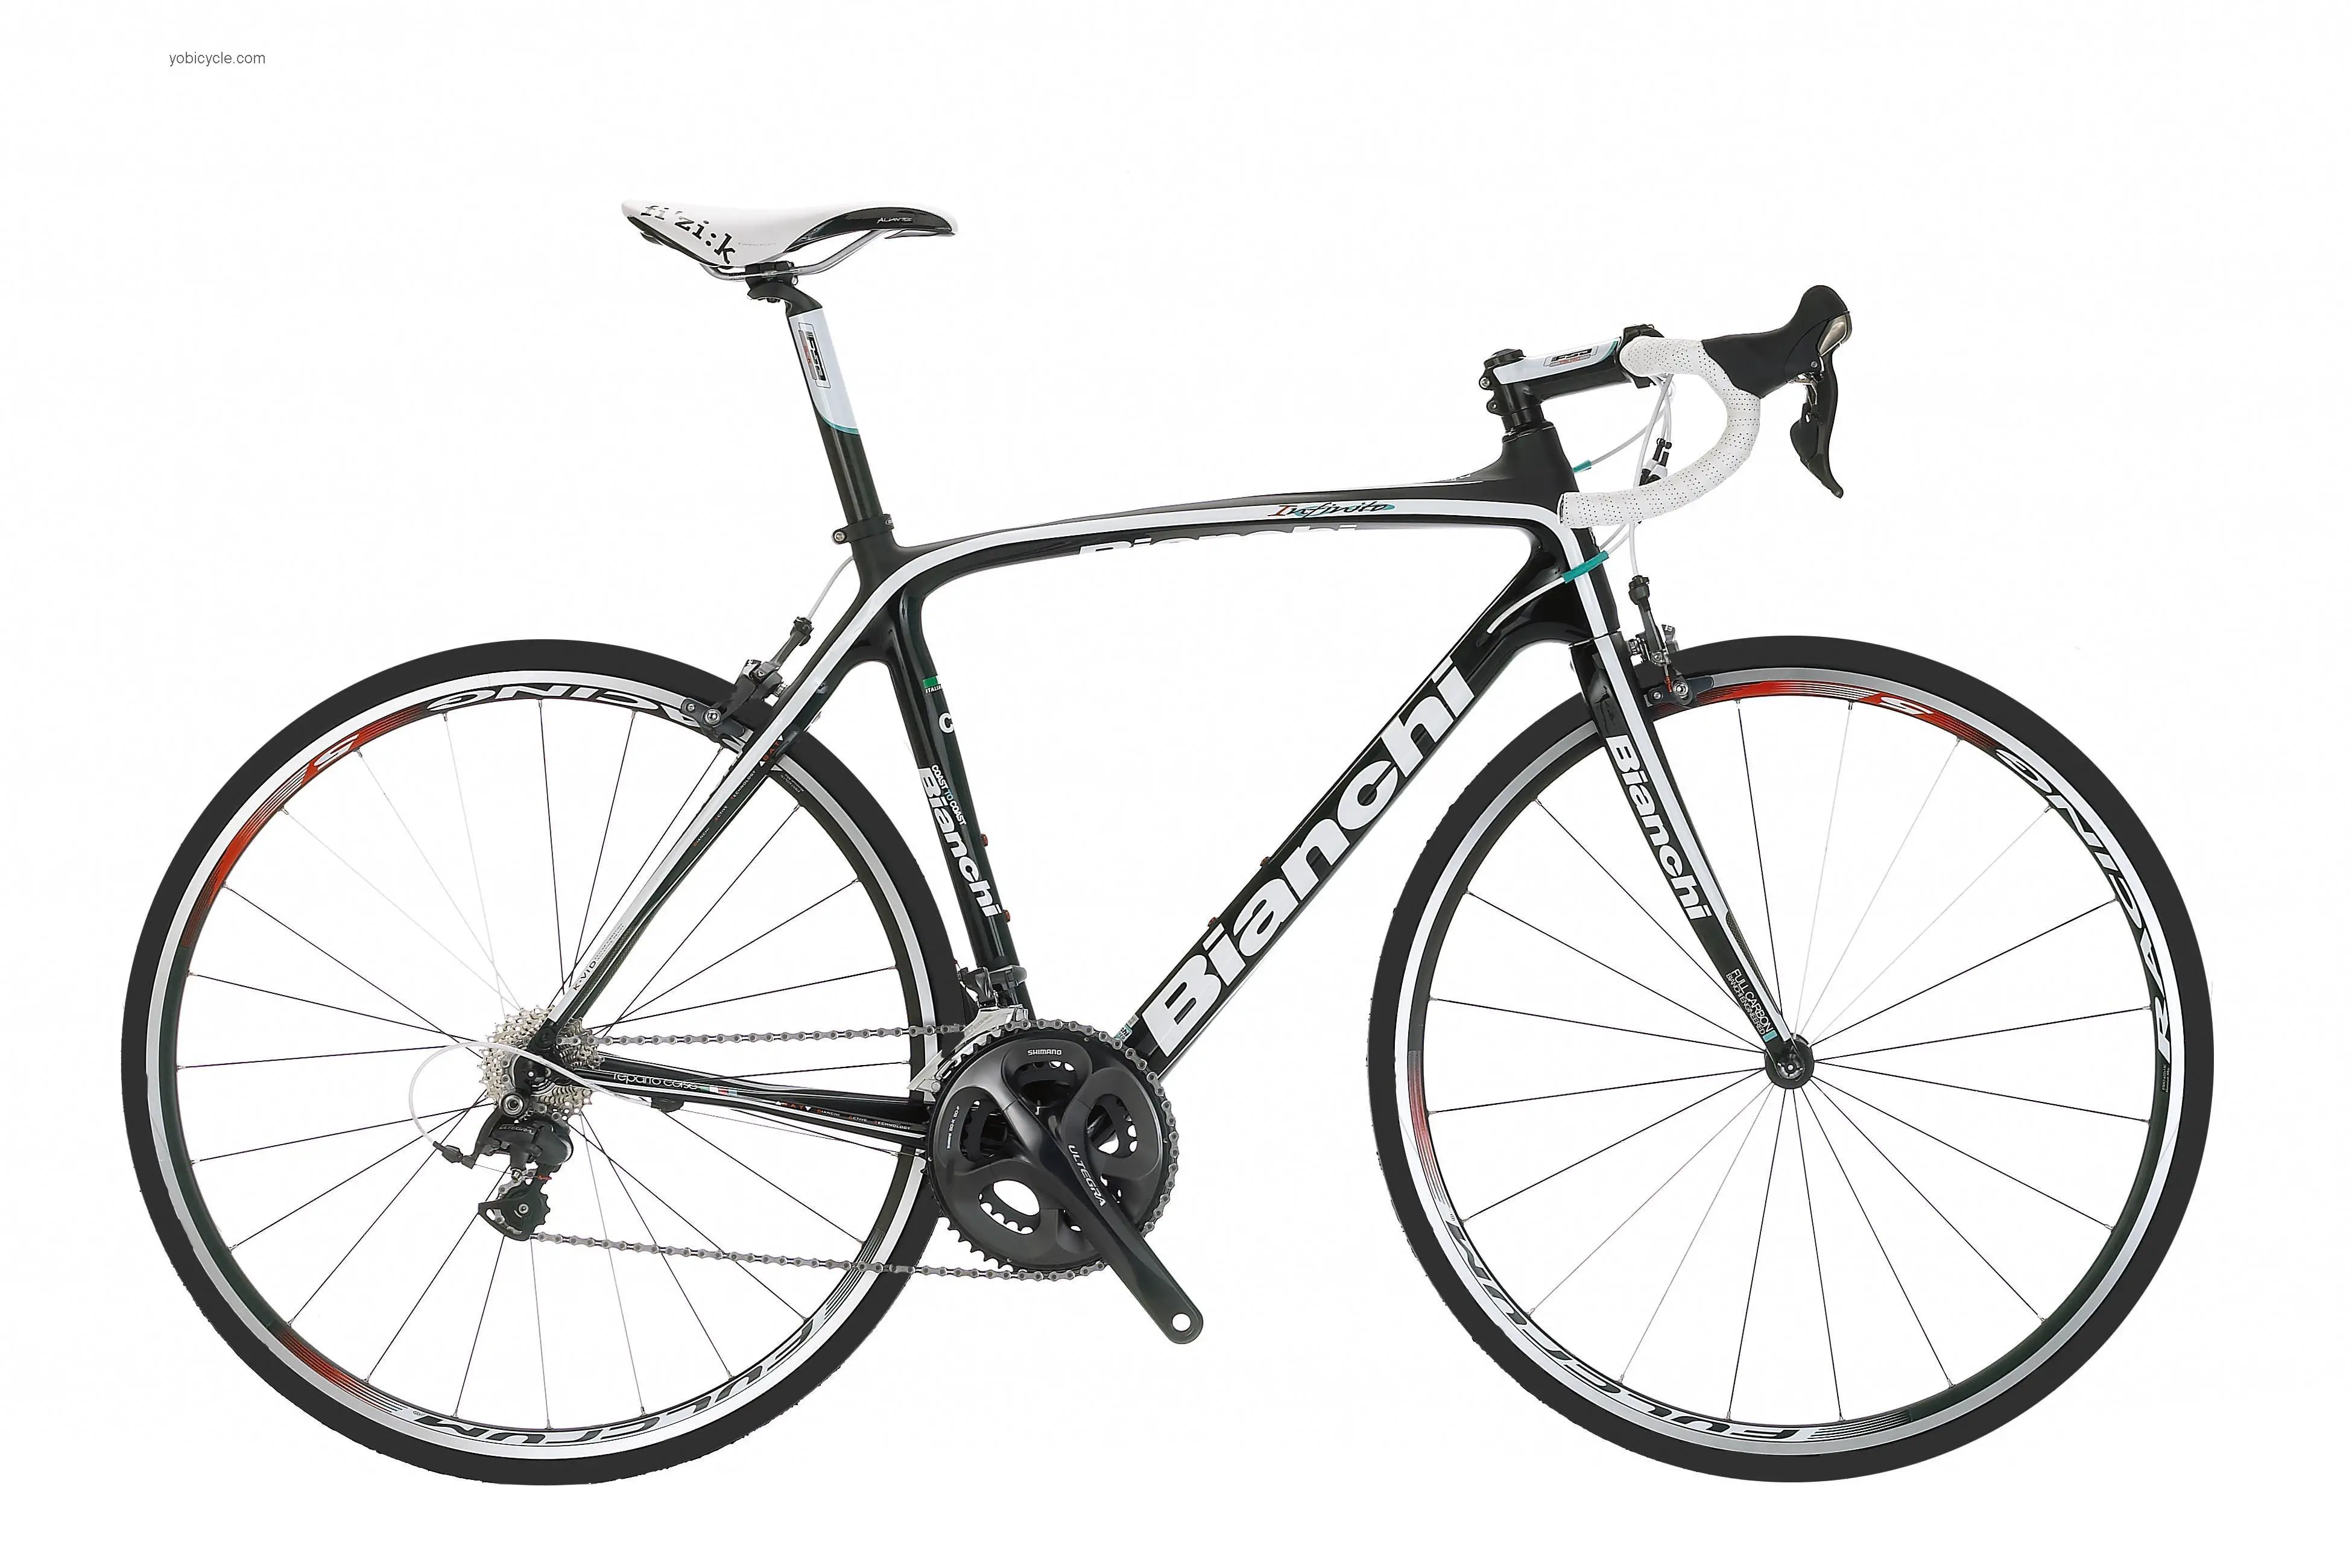 Bianchi Infinito Ultegra competitors and comparison tool online specs and performance